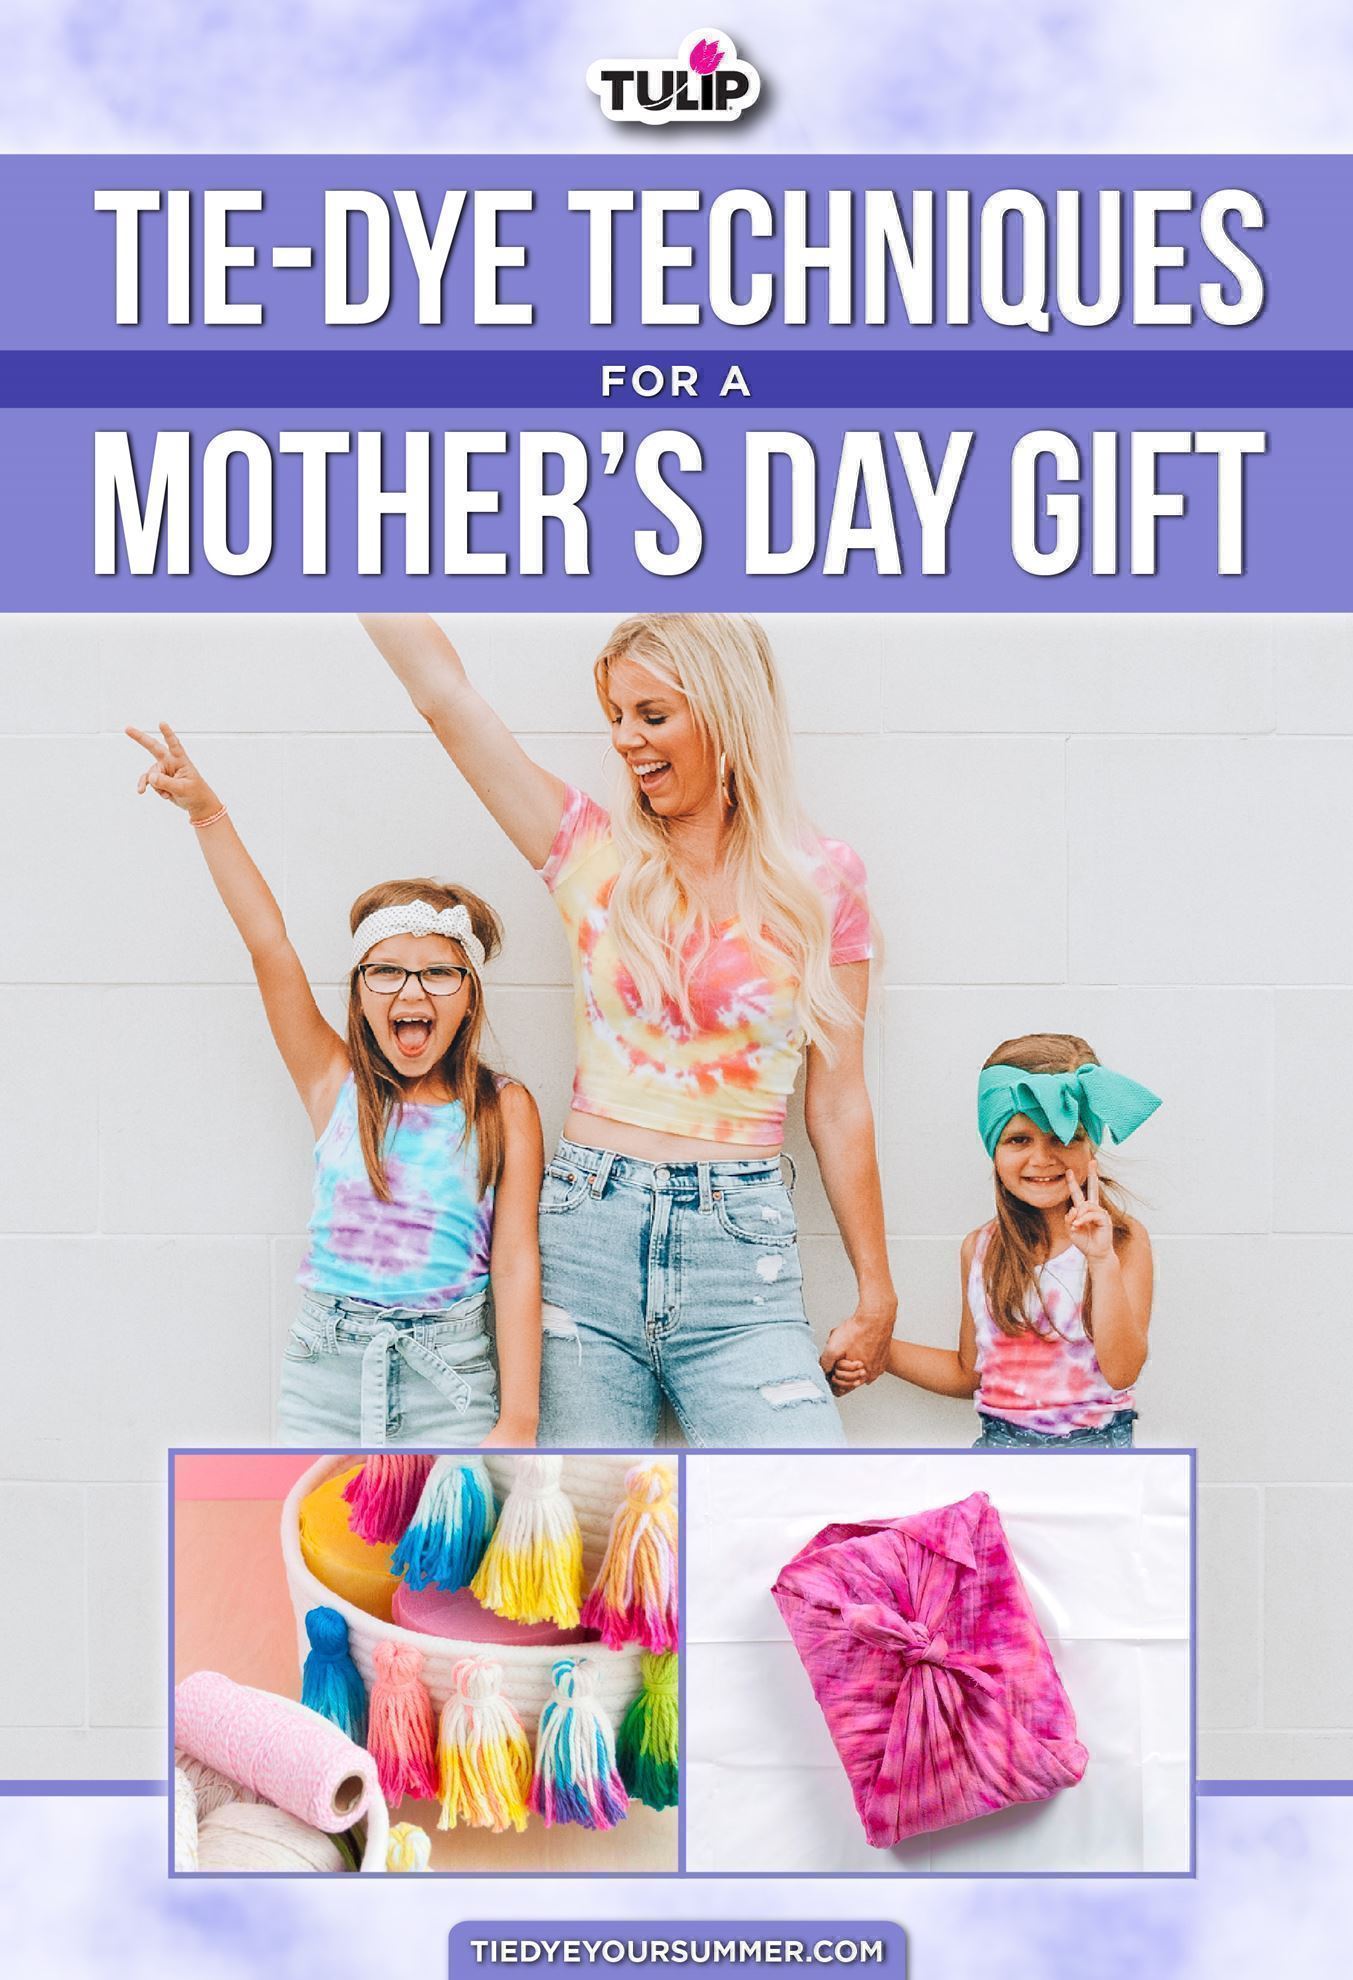 Tie-Dye Techniques for a DIY Mother’s Day Gift